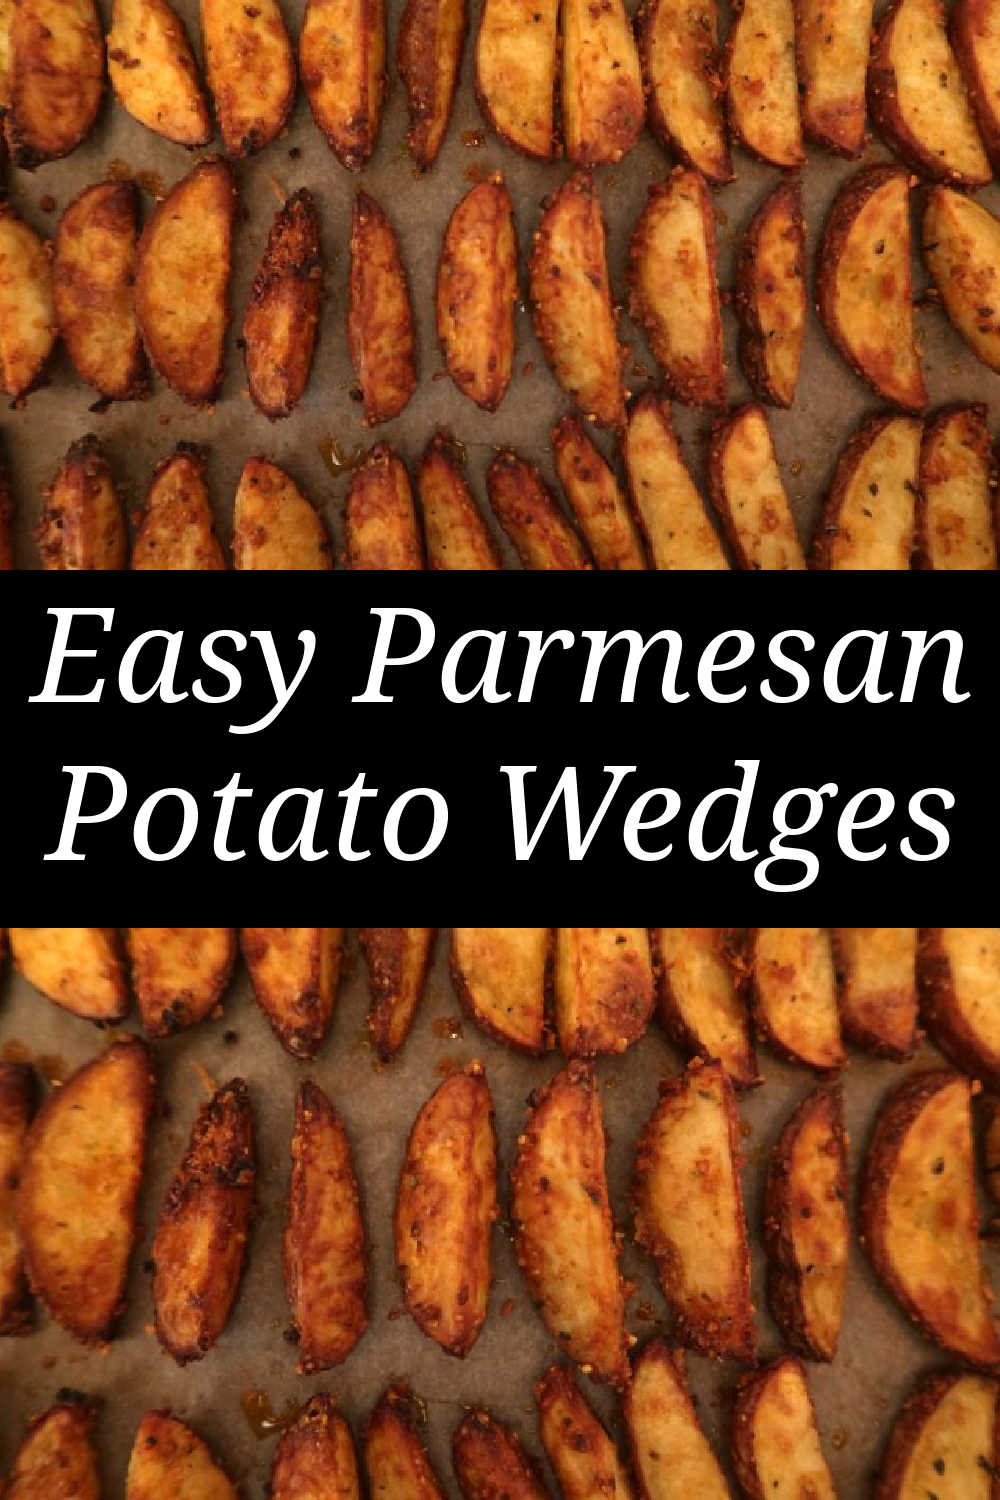 Parmesan Potato Wedges Recipe - How To Make Easy, Cheesy & Crispy Homemade Oven Baked Roasted Potatoes with the video tutorial.